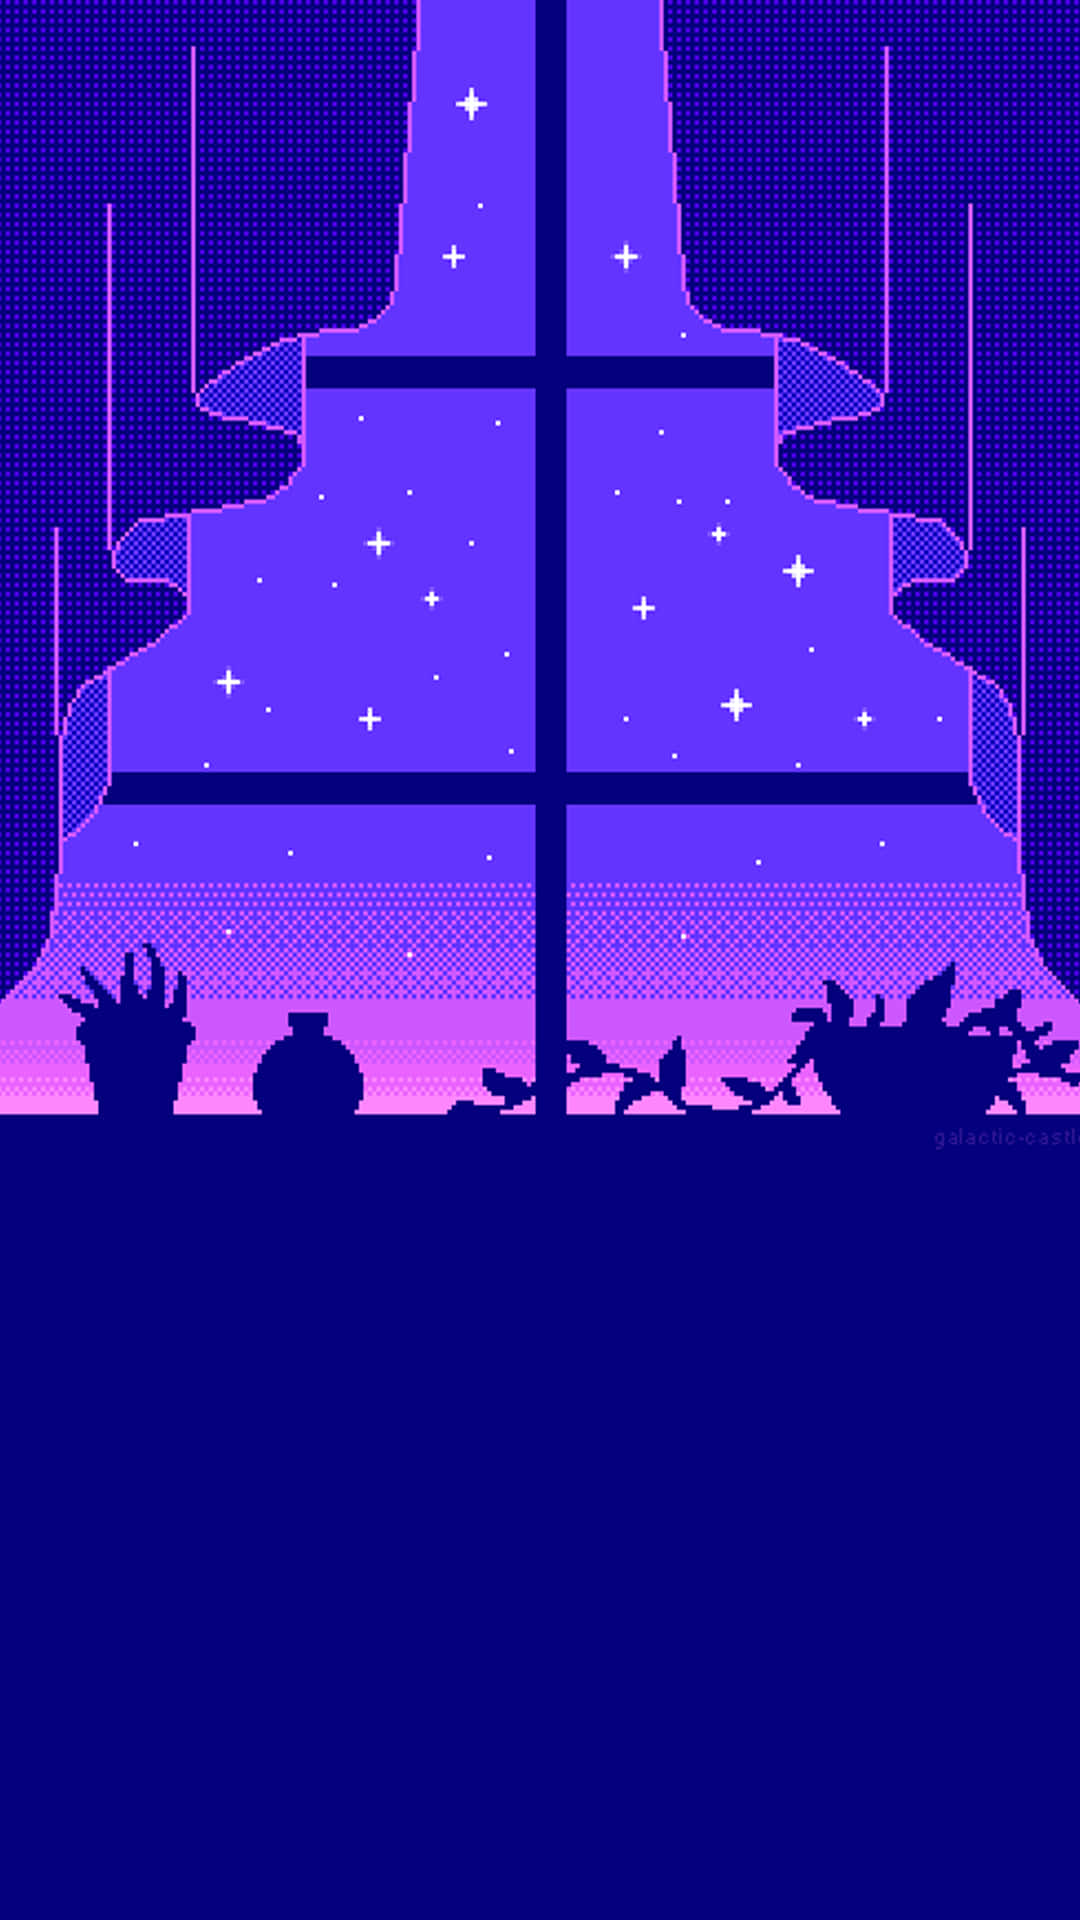 Bringing Back the 80’s Aesthetic with the Modern Smartphone Wallpaper